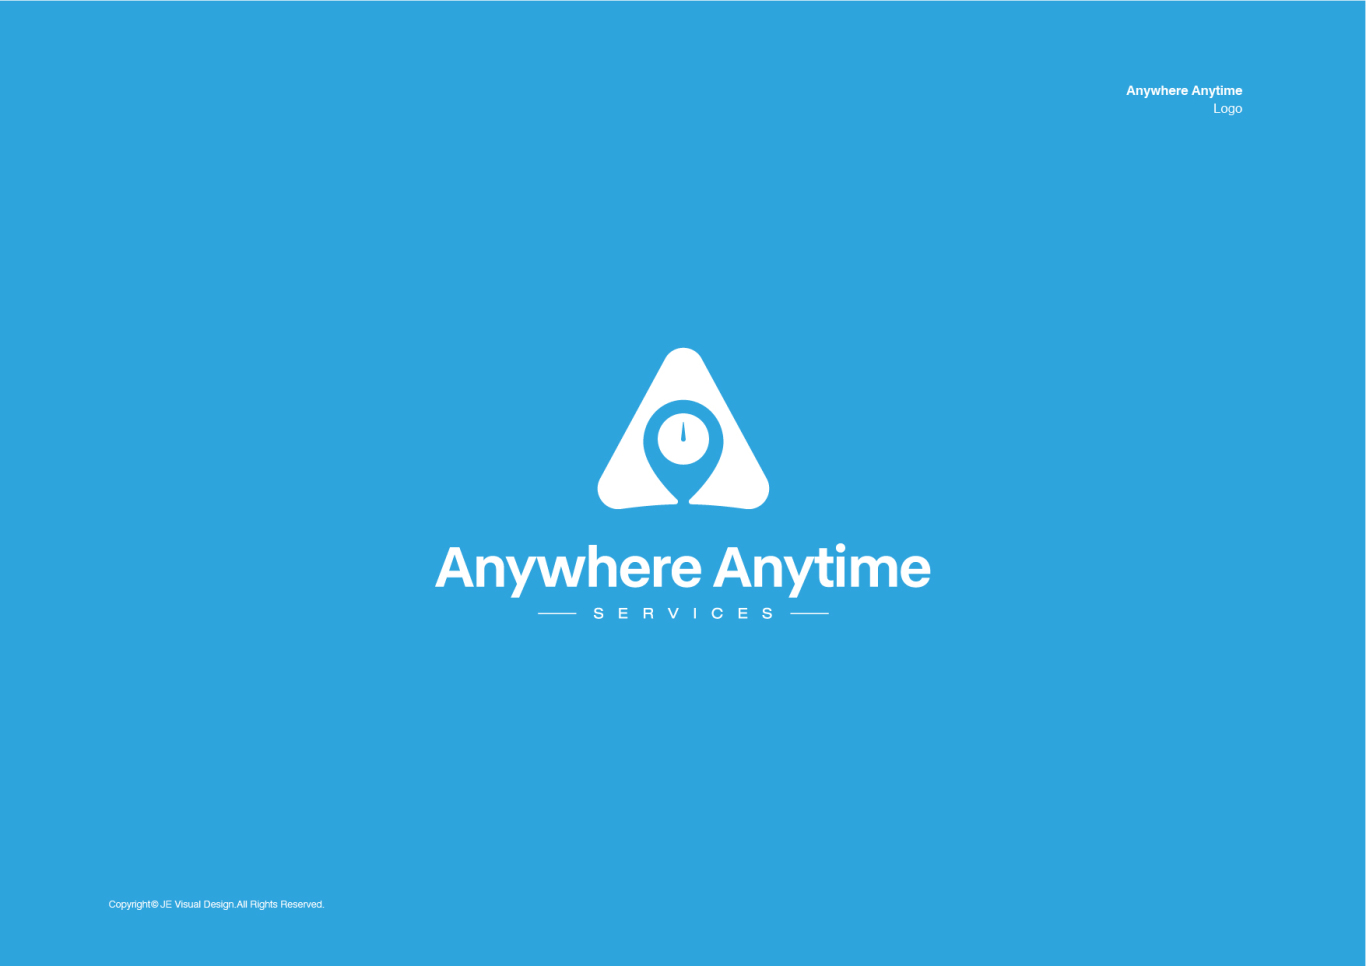 Anywhere Anytime logo设计图5